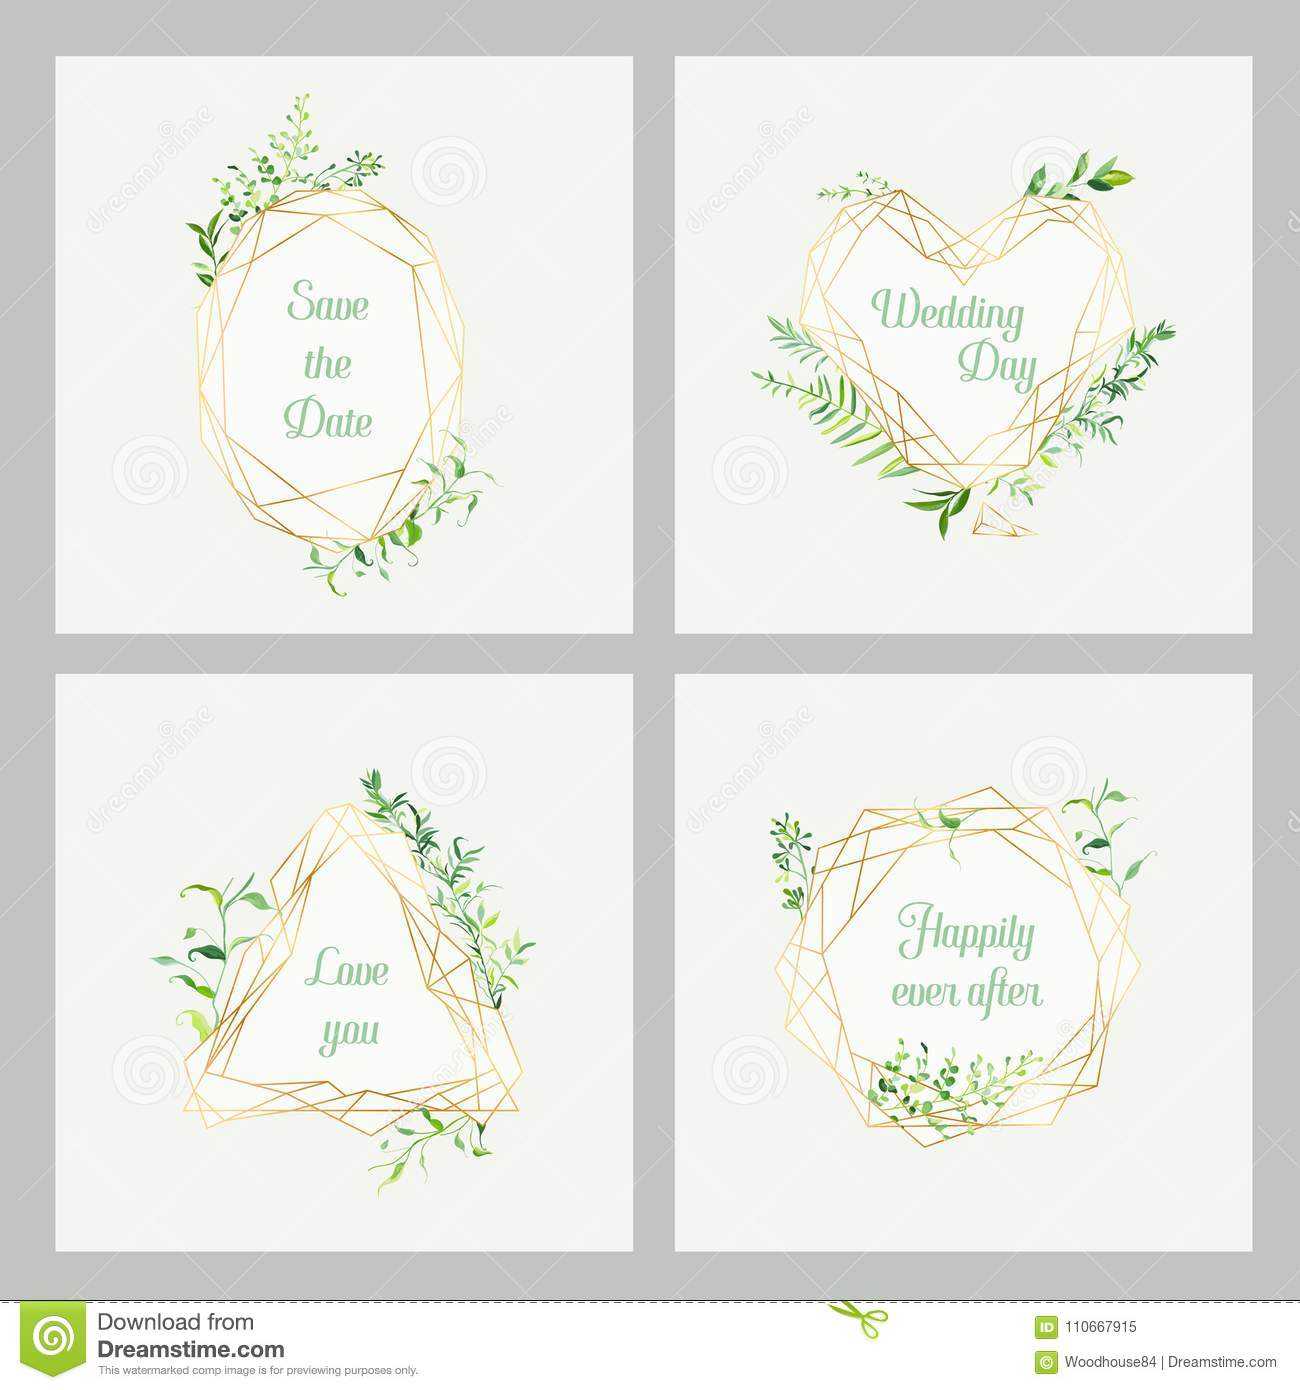 Wedding Invitation Floral Templates Set. Save The Date In Celebrate It Templates Place Cards